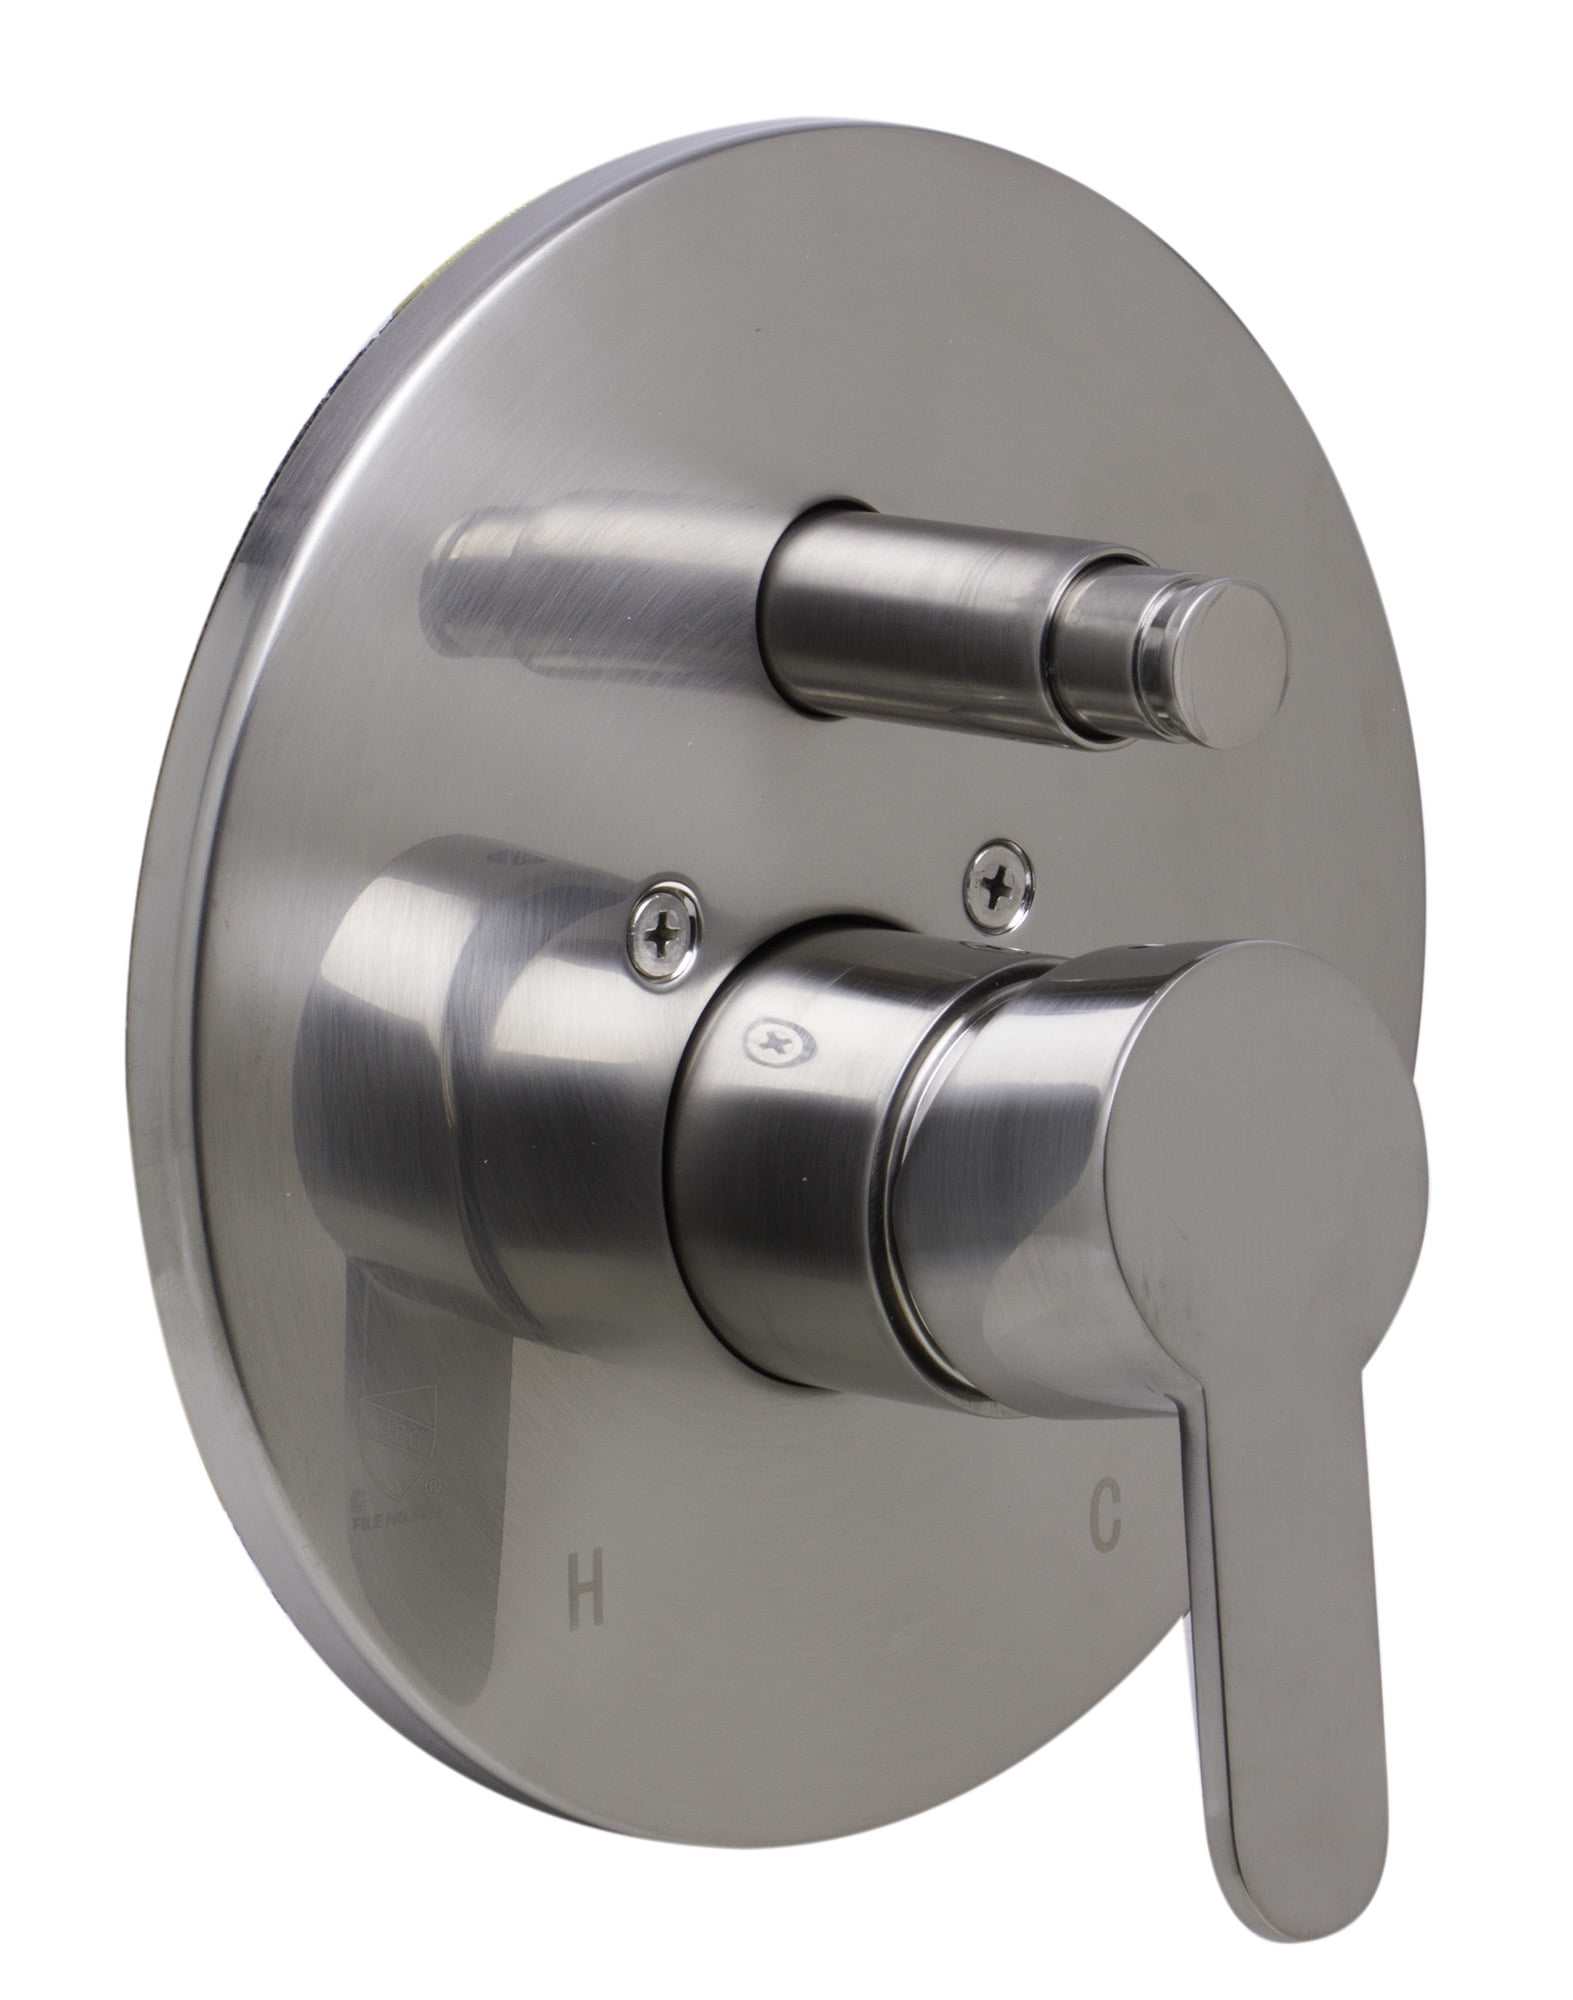 ALFI brand AB3101-BN Brushed Nickel Shower Valve Mixer with Rounded Lever  Handle and Diverter